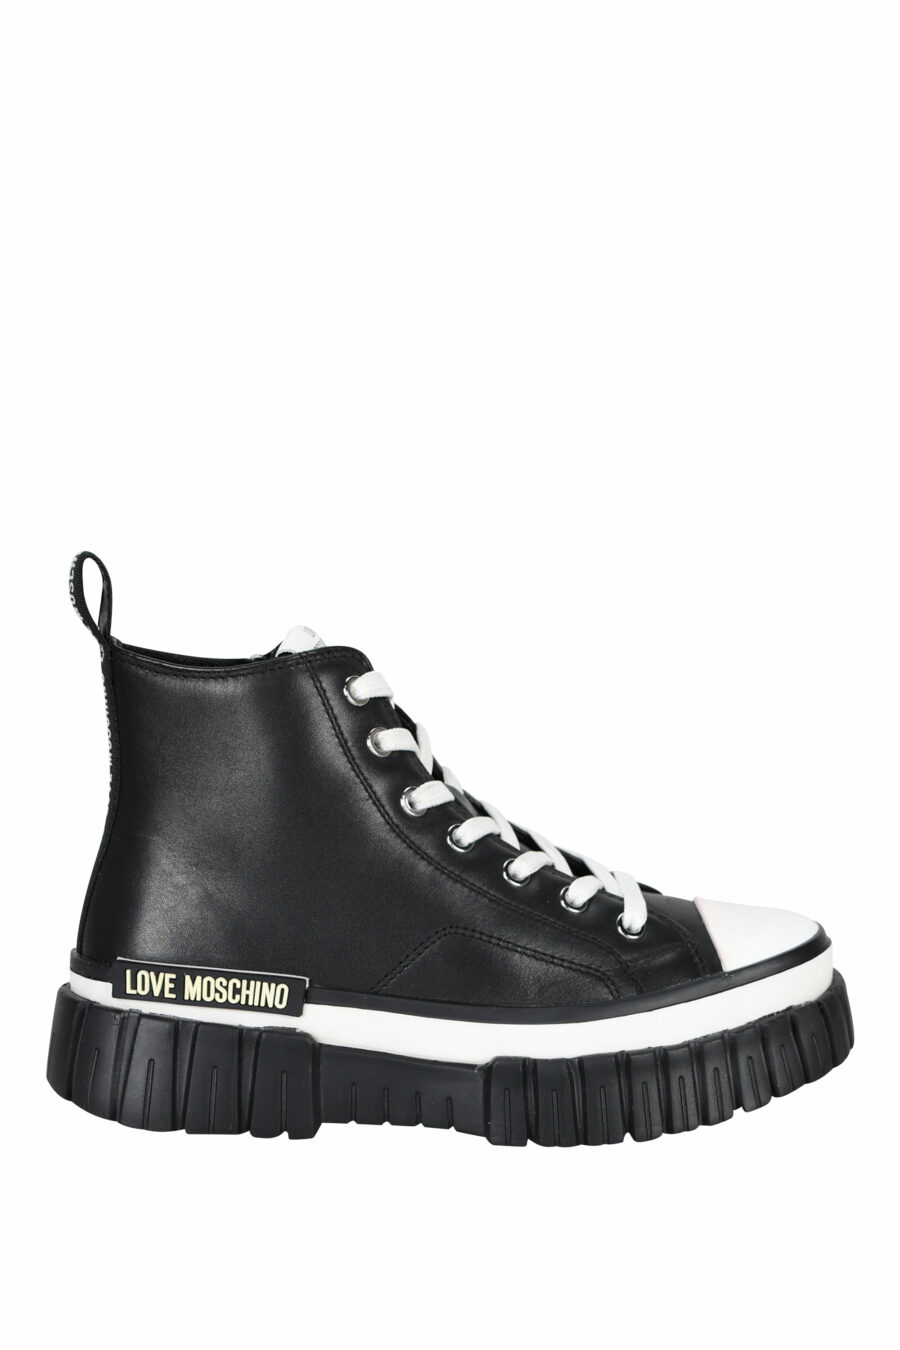 Black ankle boots with white laces and mini-logo - 8050142937599